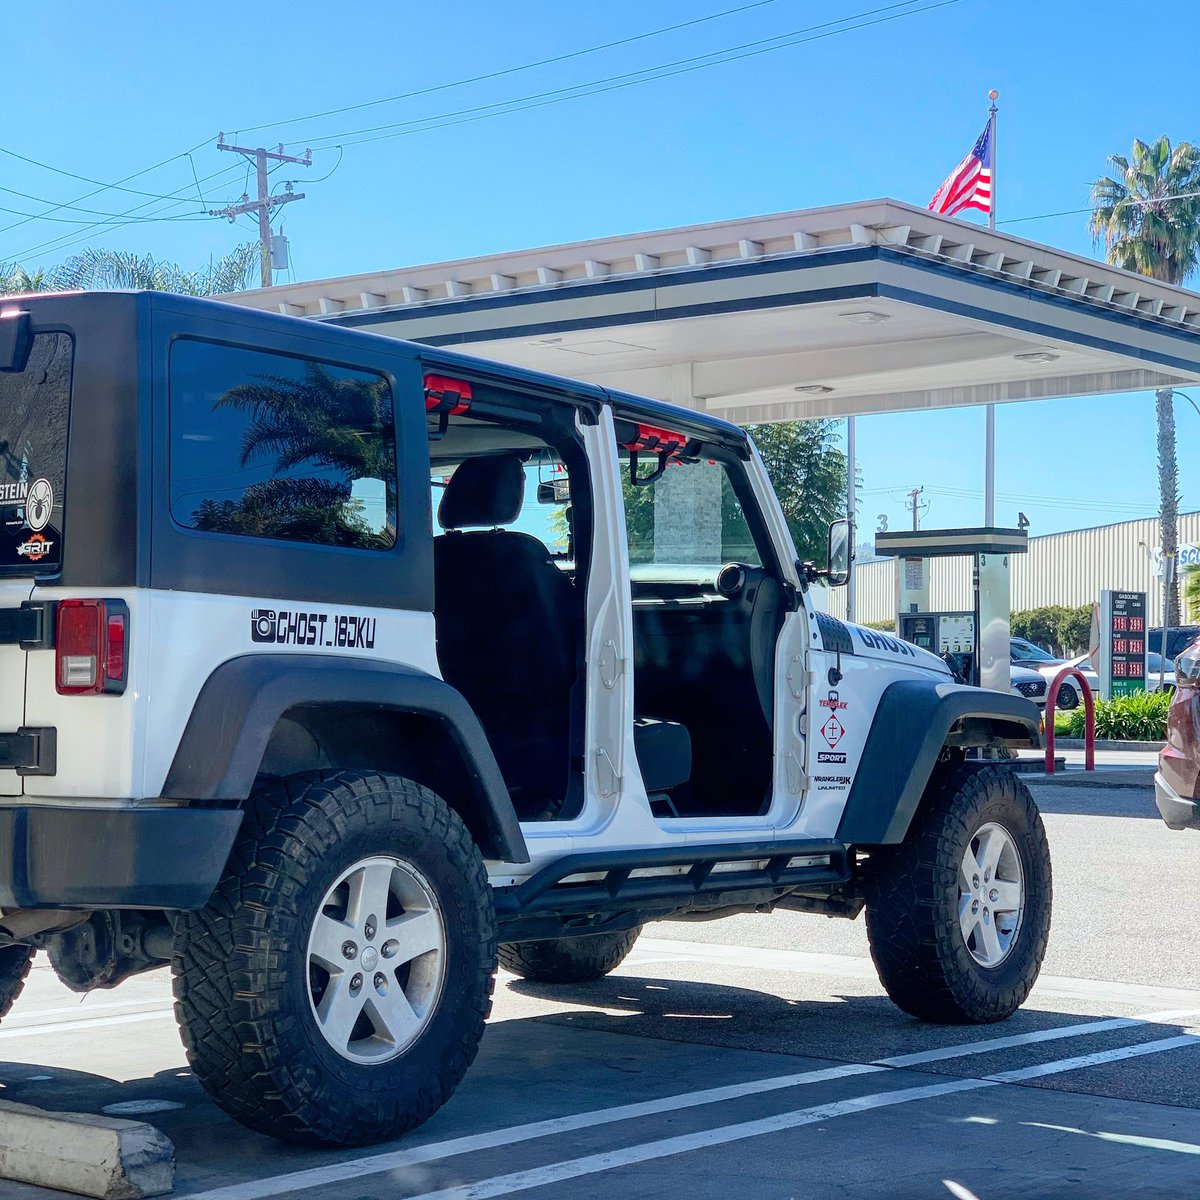 Perfect day to take off the doors today in SoCal 😎✌️

__O|||||||O__
#JeepWave #JeepNation #JeepCraze #JeepGram #JeepLove #JeepLifestyle #WranglerUnlimited #LucasOil #Dana44